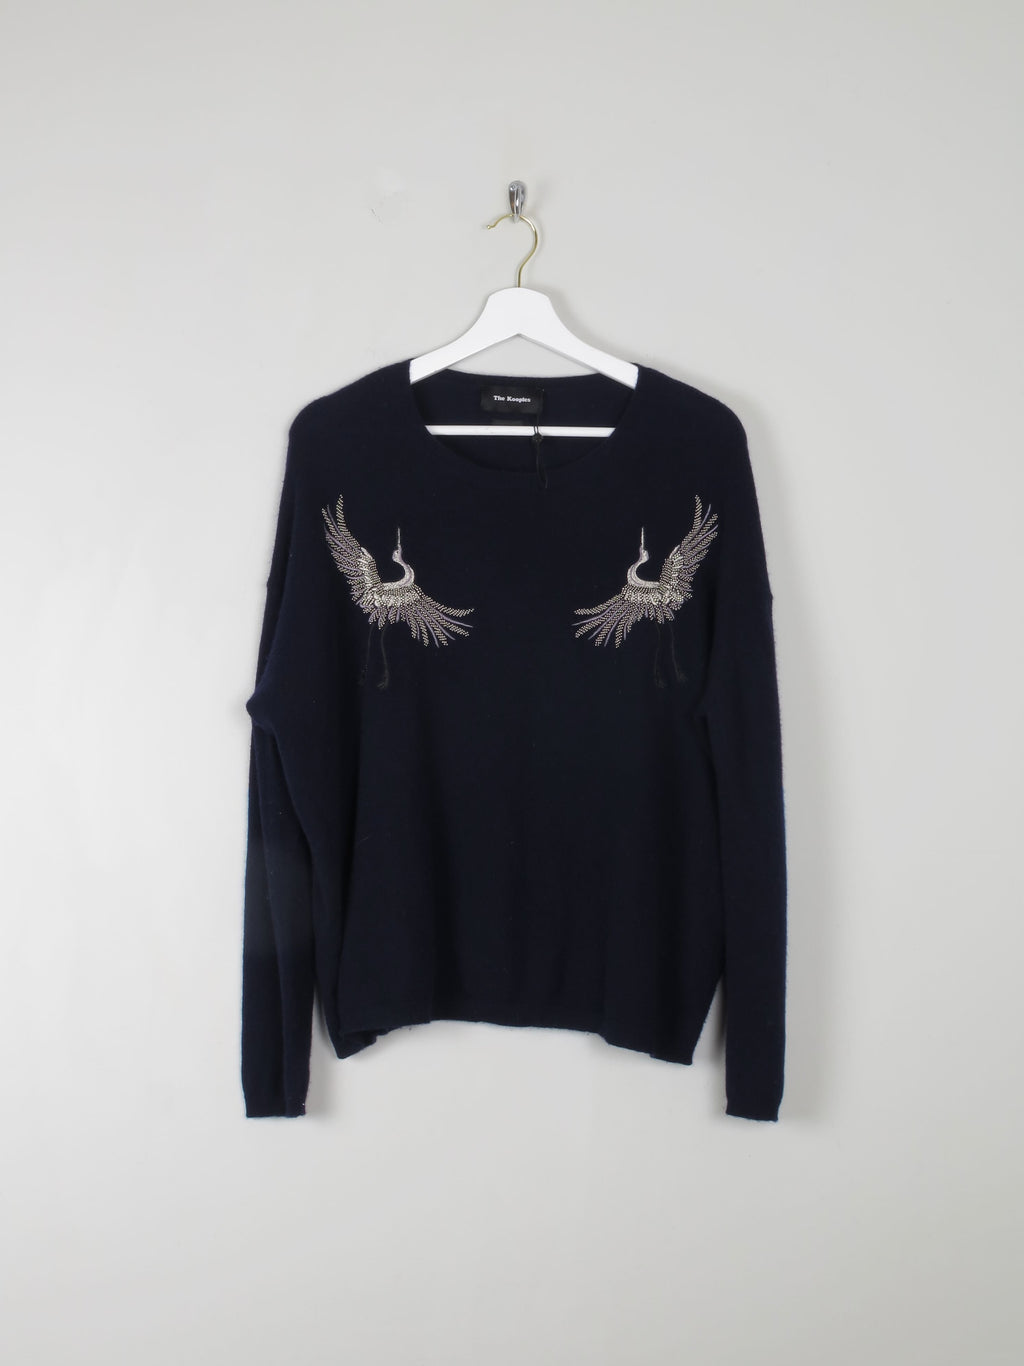 Women's Navy Cashmere Embroidered Jumper By Kooples M/L - The Harlequin